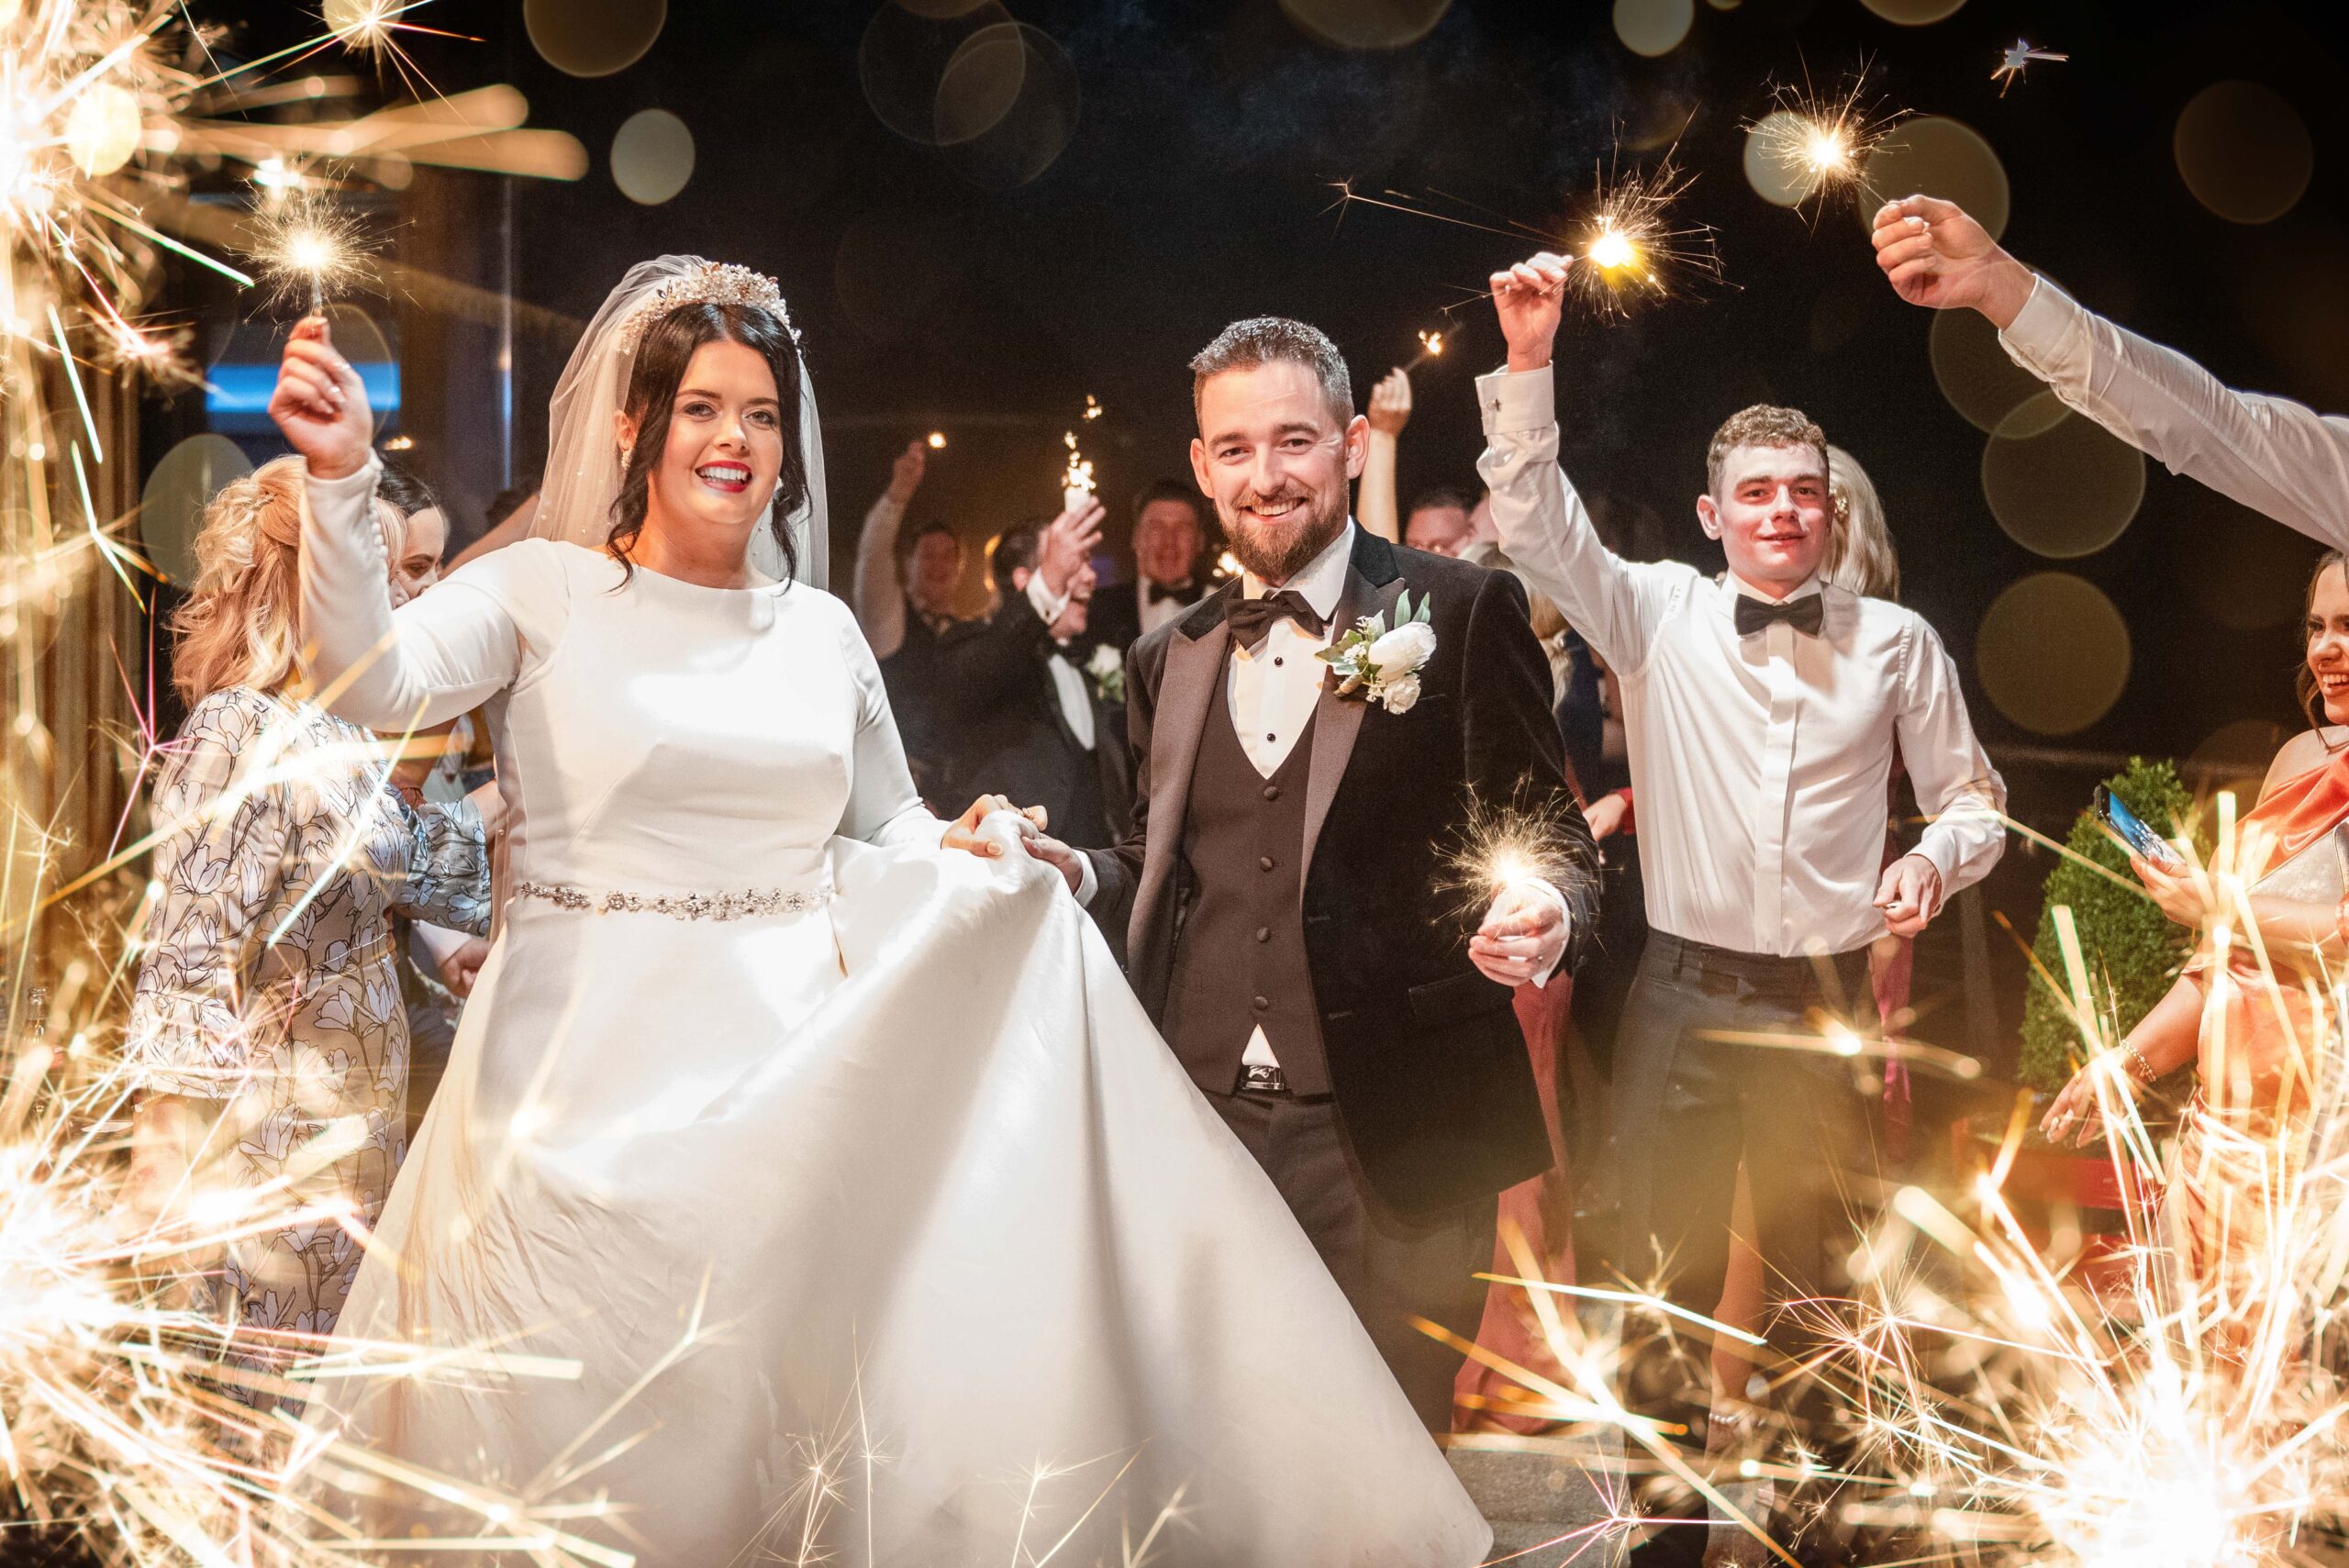 How to get the Perfect Sparkler Photos